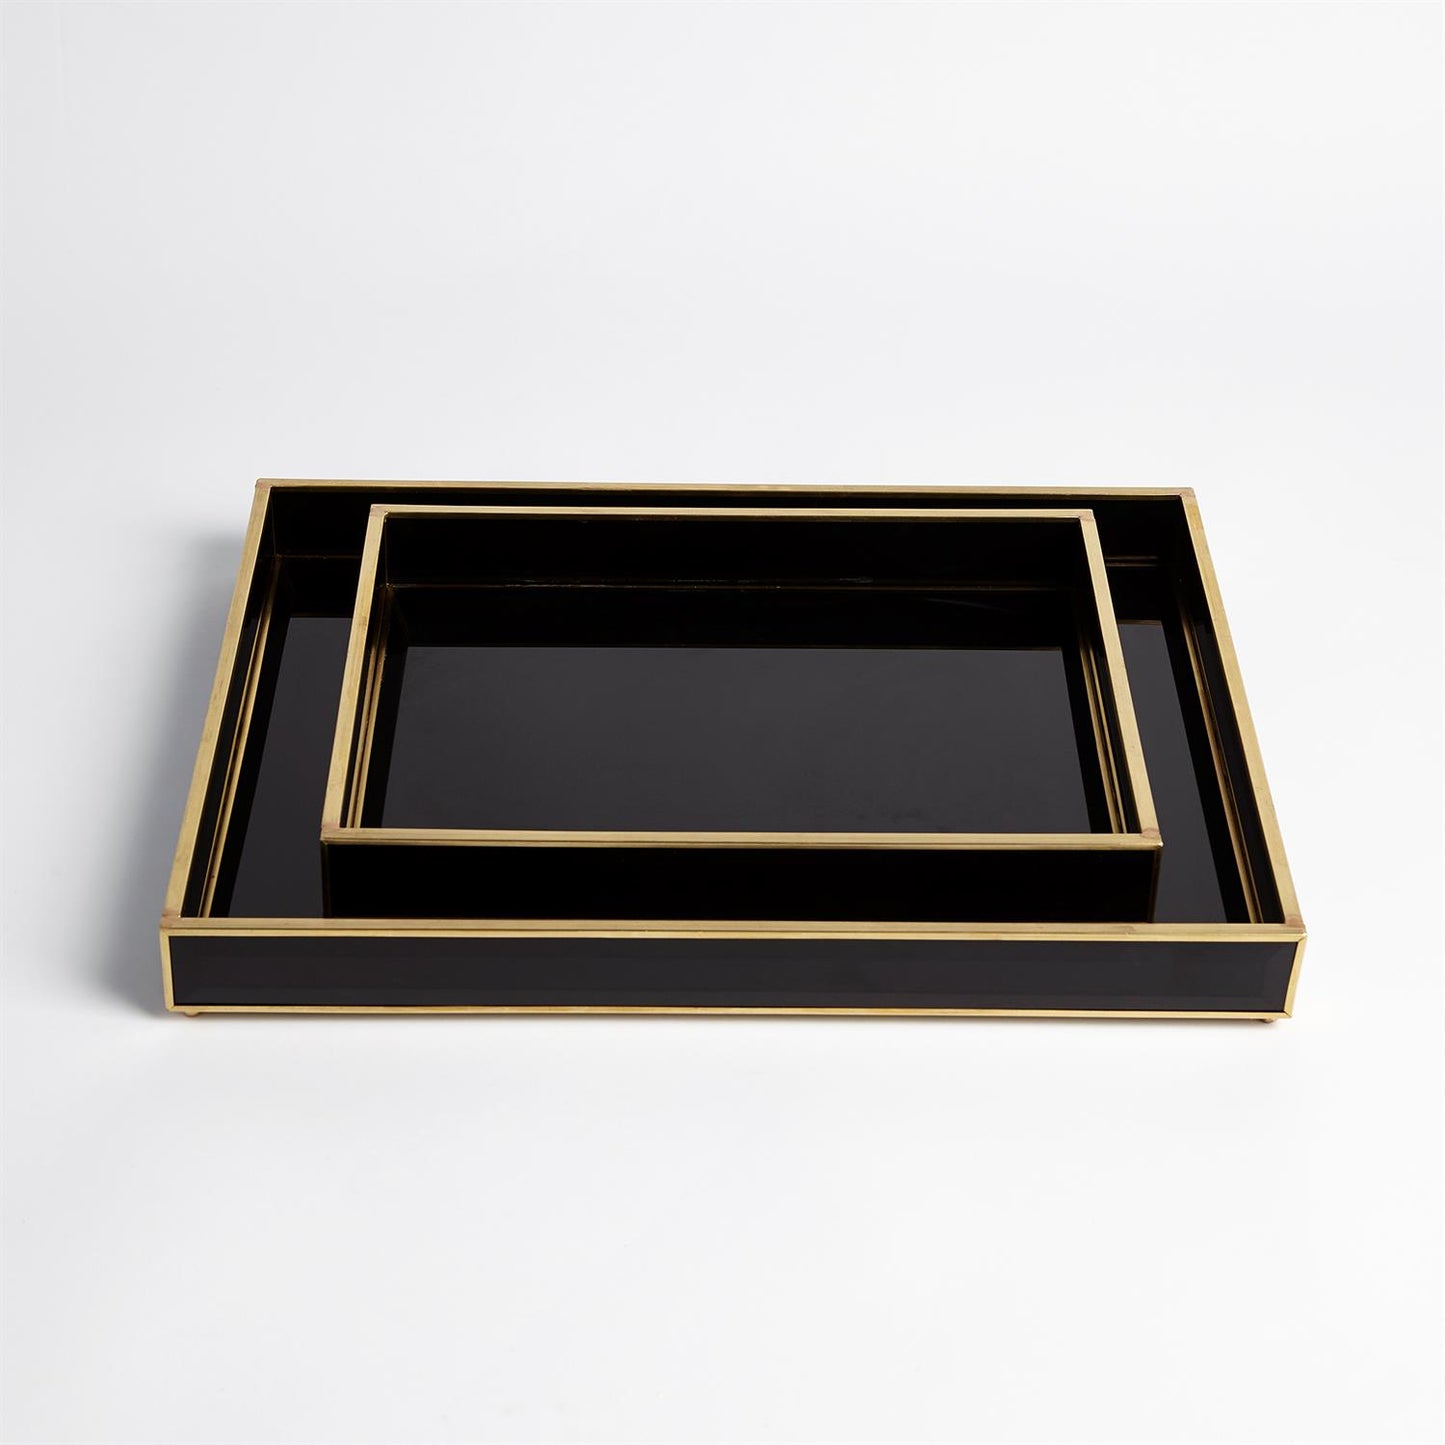 The Bella Black Tray - A versatile and chic The Bella Black Tray from GRACE BLU SHOPPE, perfect for serving or organizing your space.